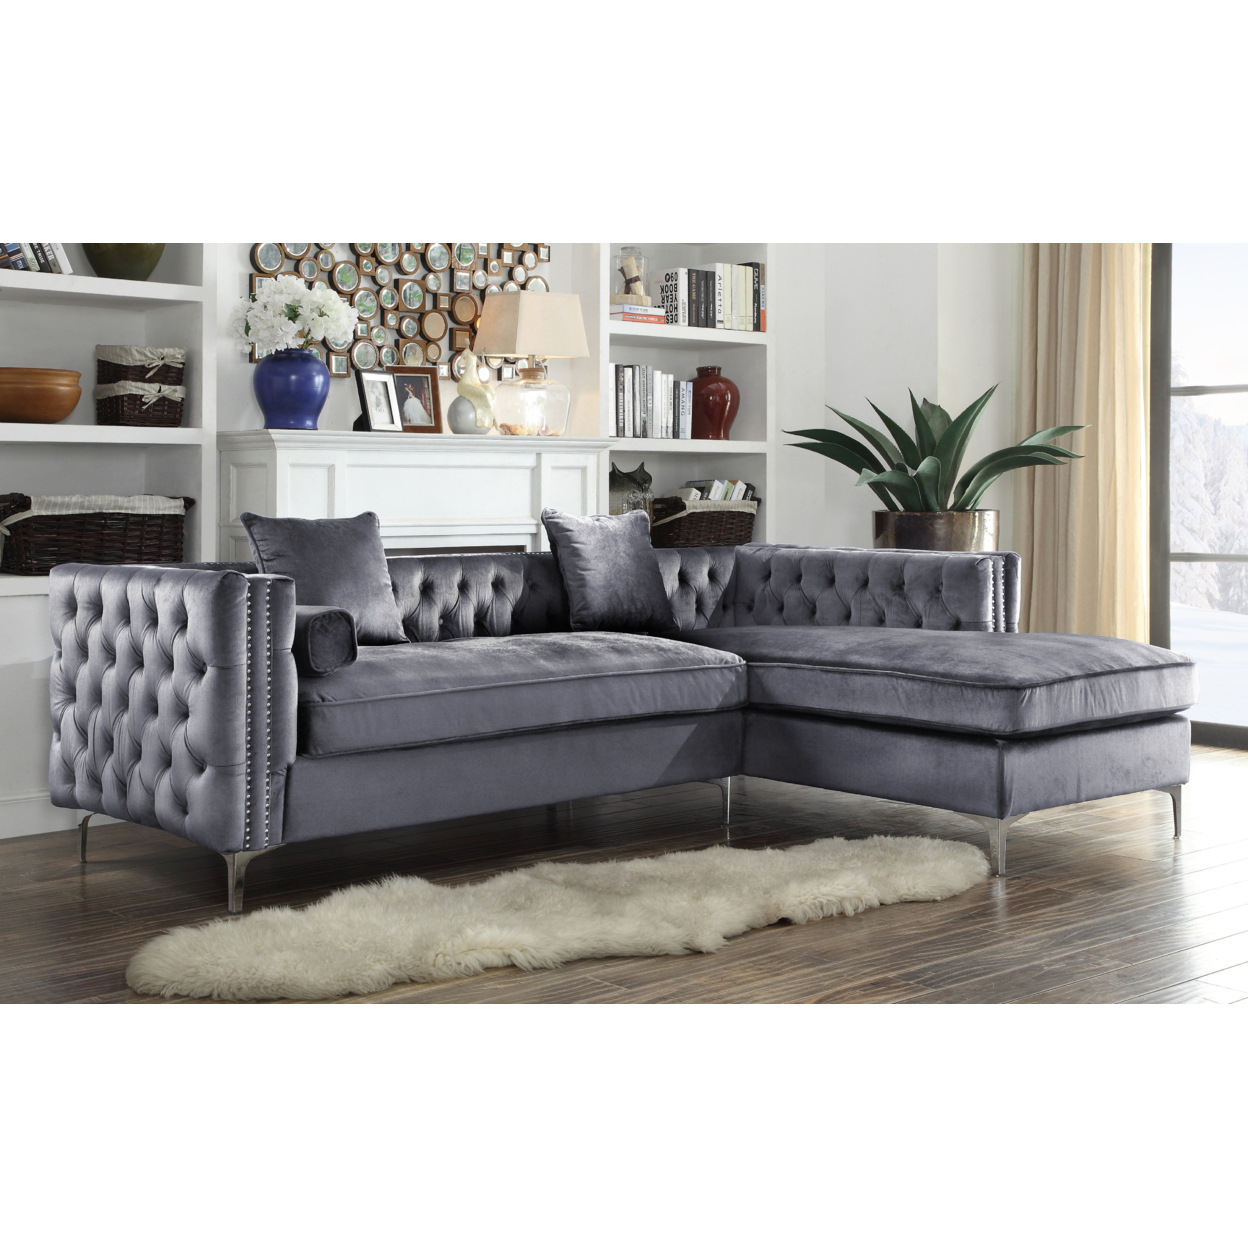 Picasso Velvet Right Facing Sectional Sofa Button Tufted With Silver Nailhead Trim Silvertone Metal Y-leg - Navy